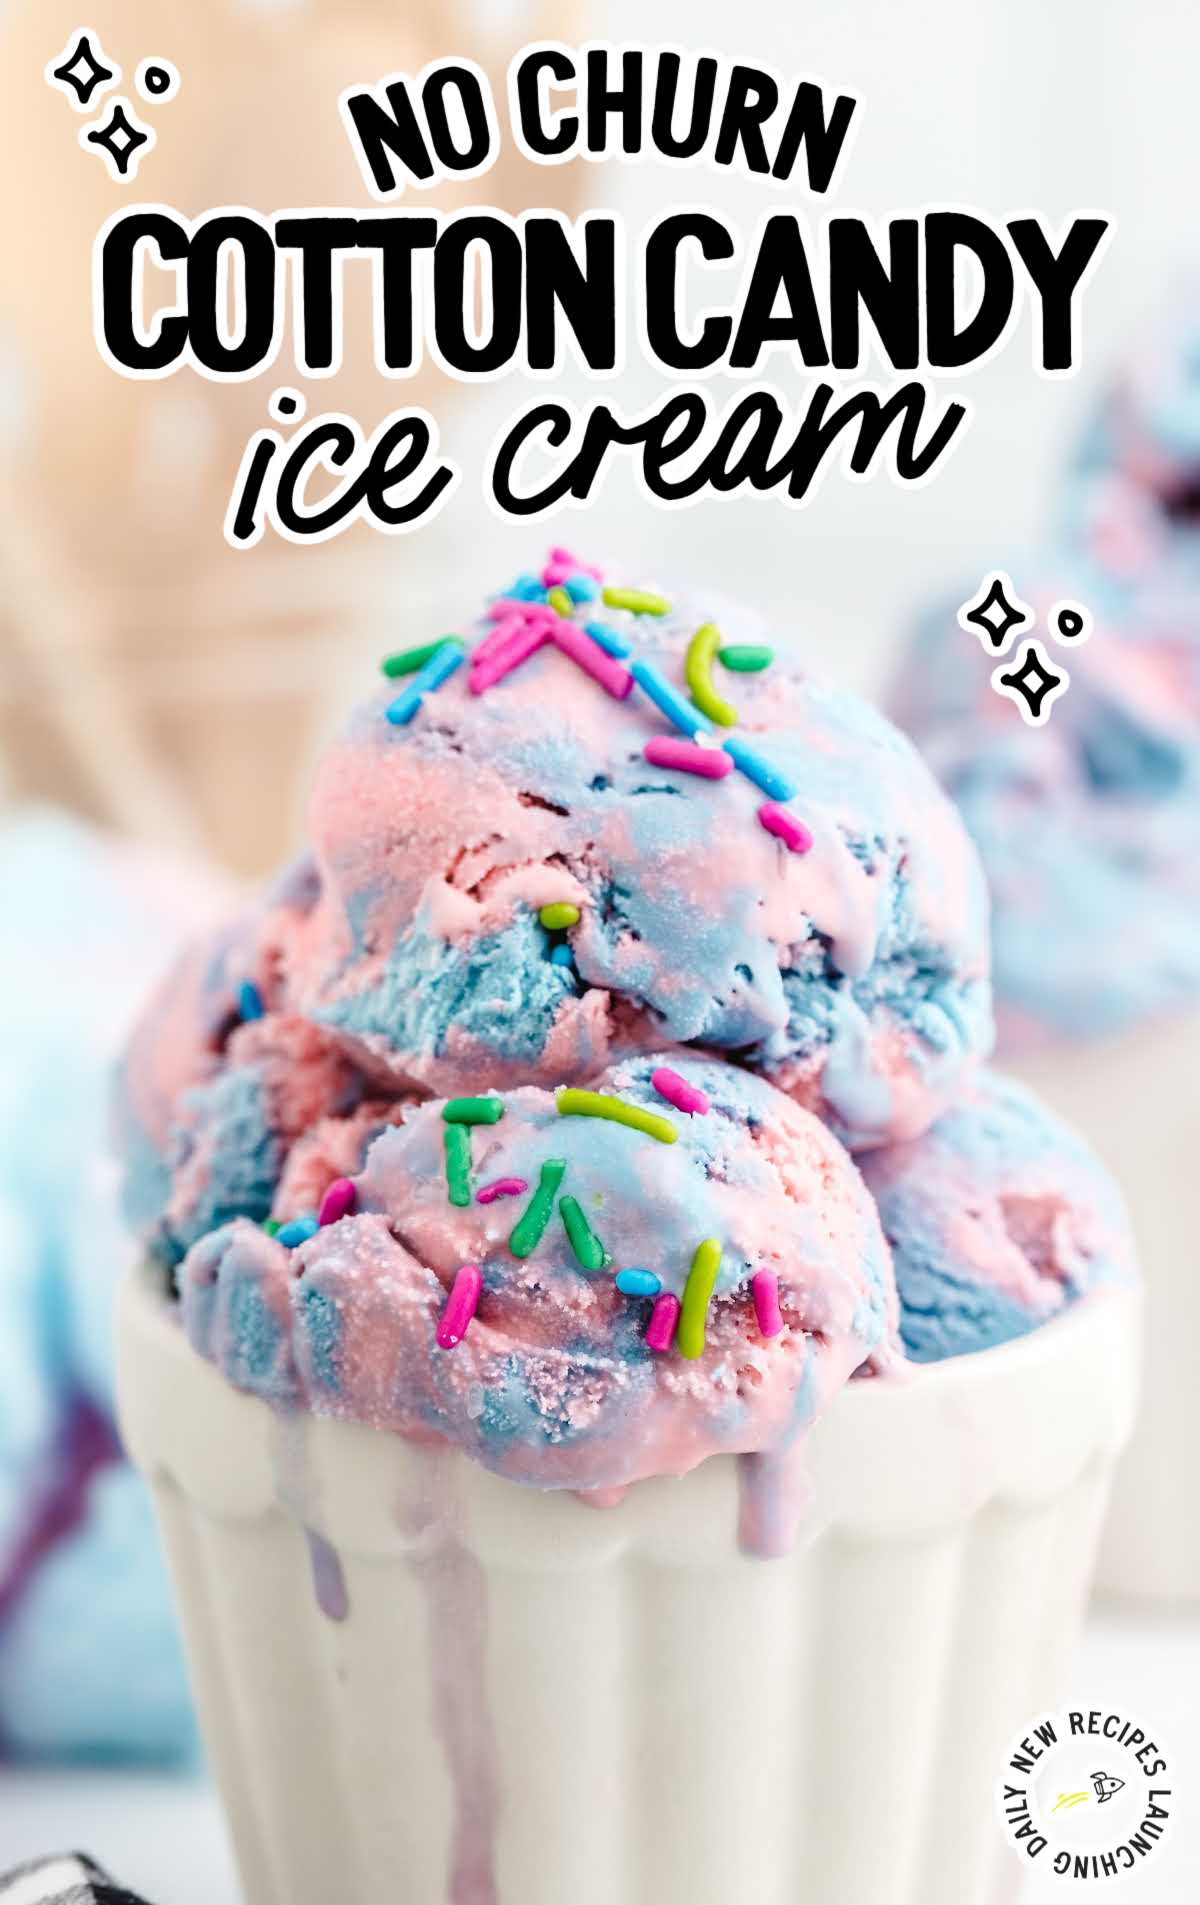 No-Churn Cotton Candy Ice Cream in a cup